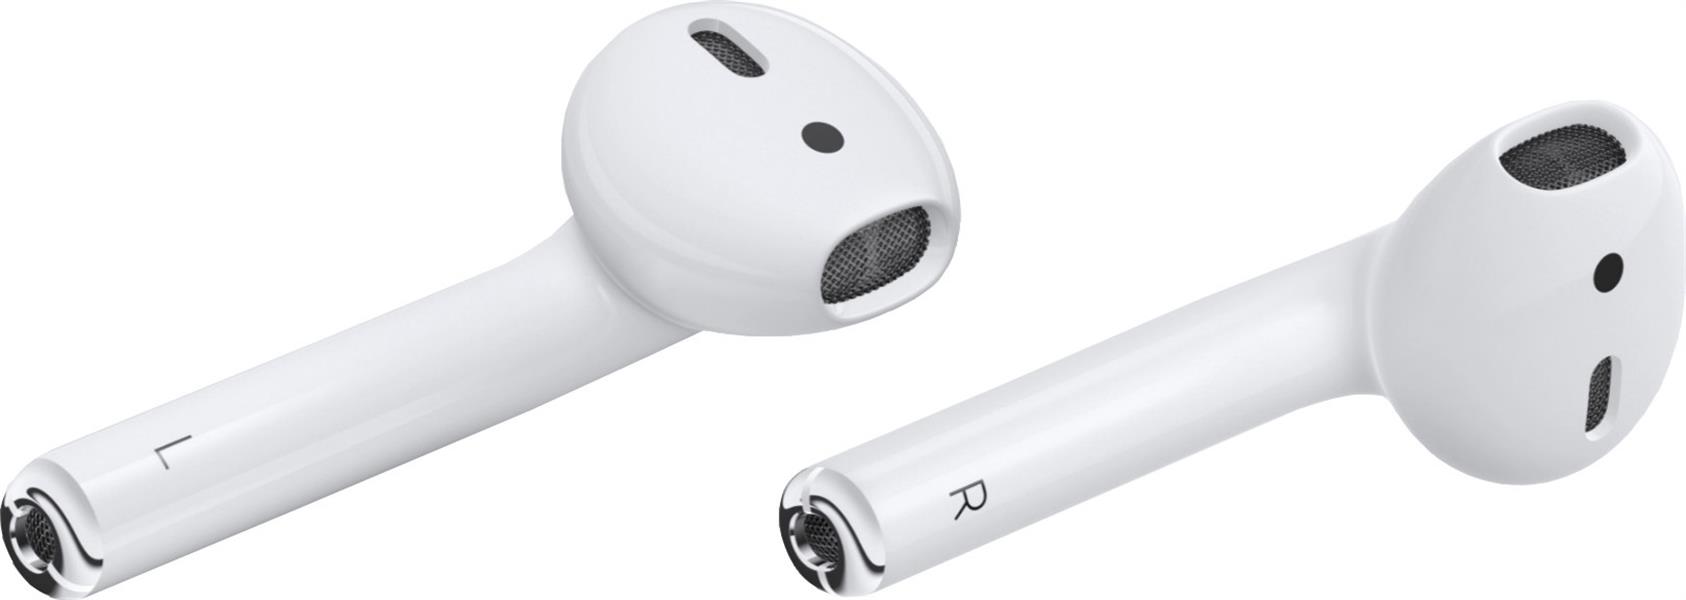 Apple Airpods 2 2019 incl Charging Case White 